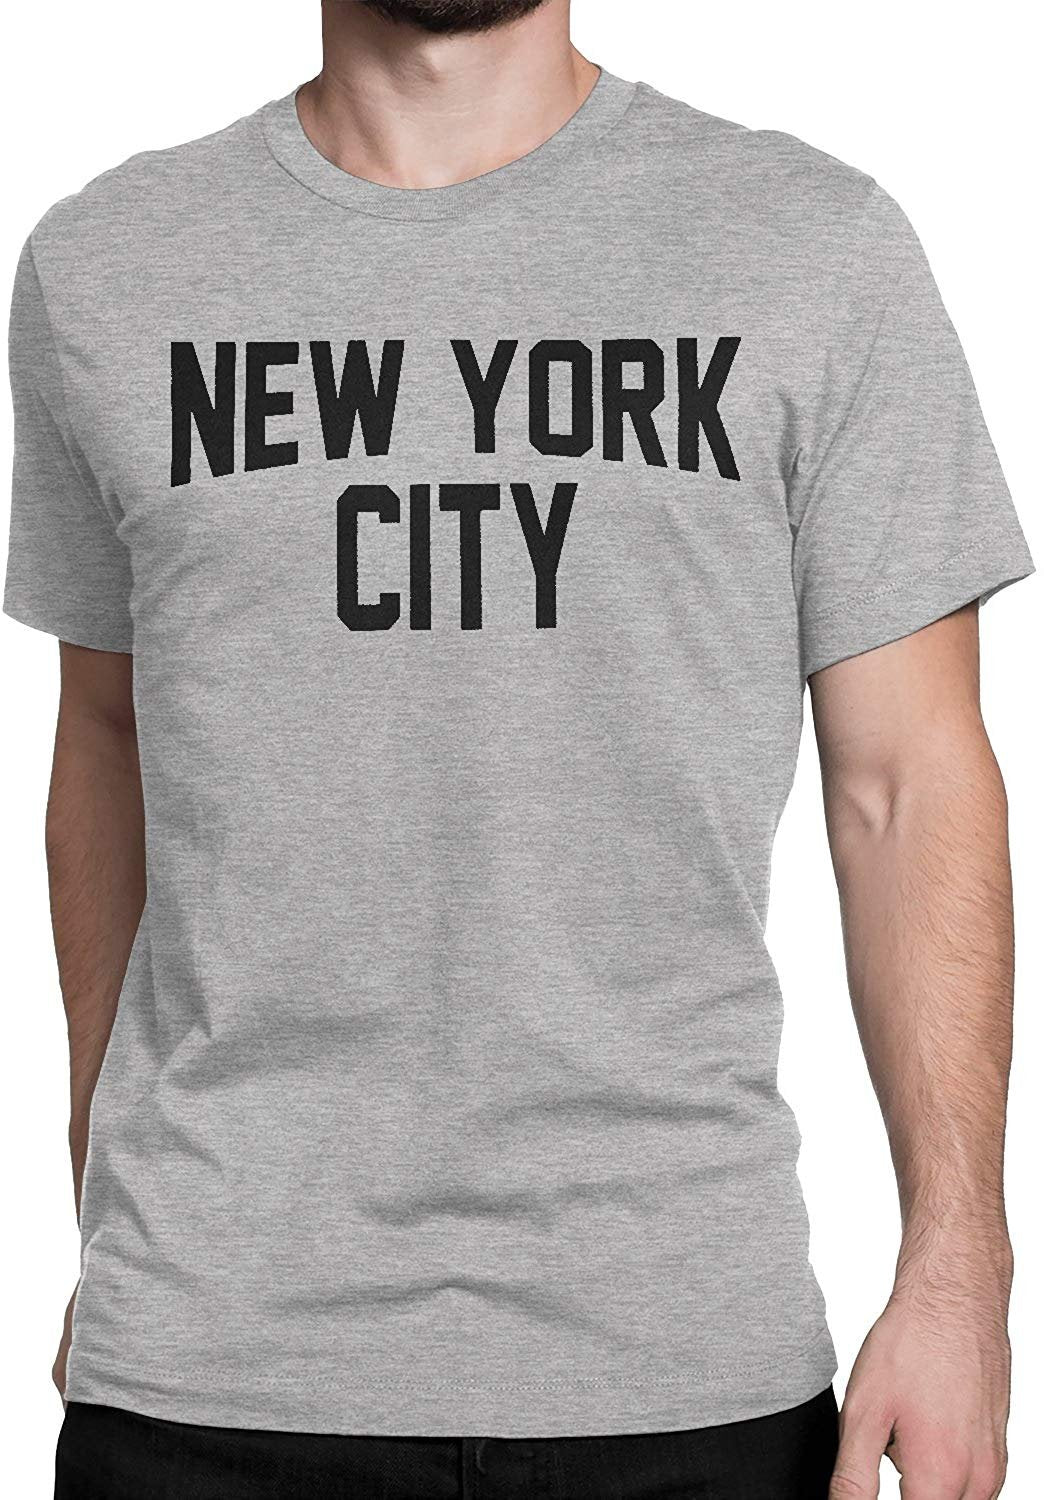 Buy Your New York City Screen Printed Tee's All Colors & Sizes